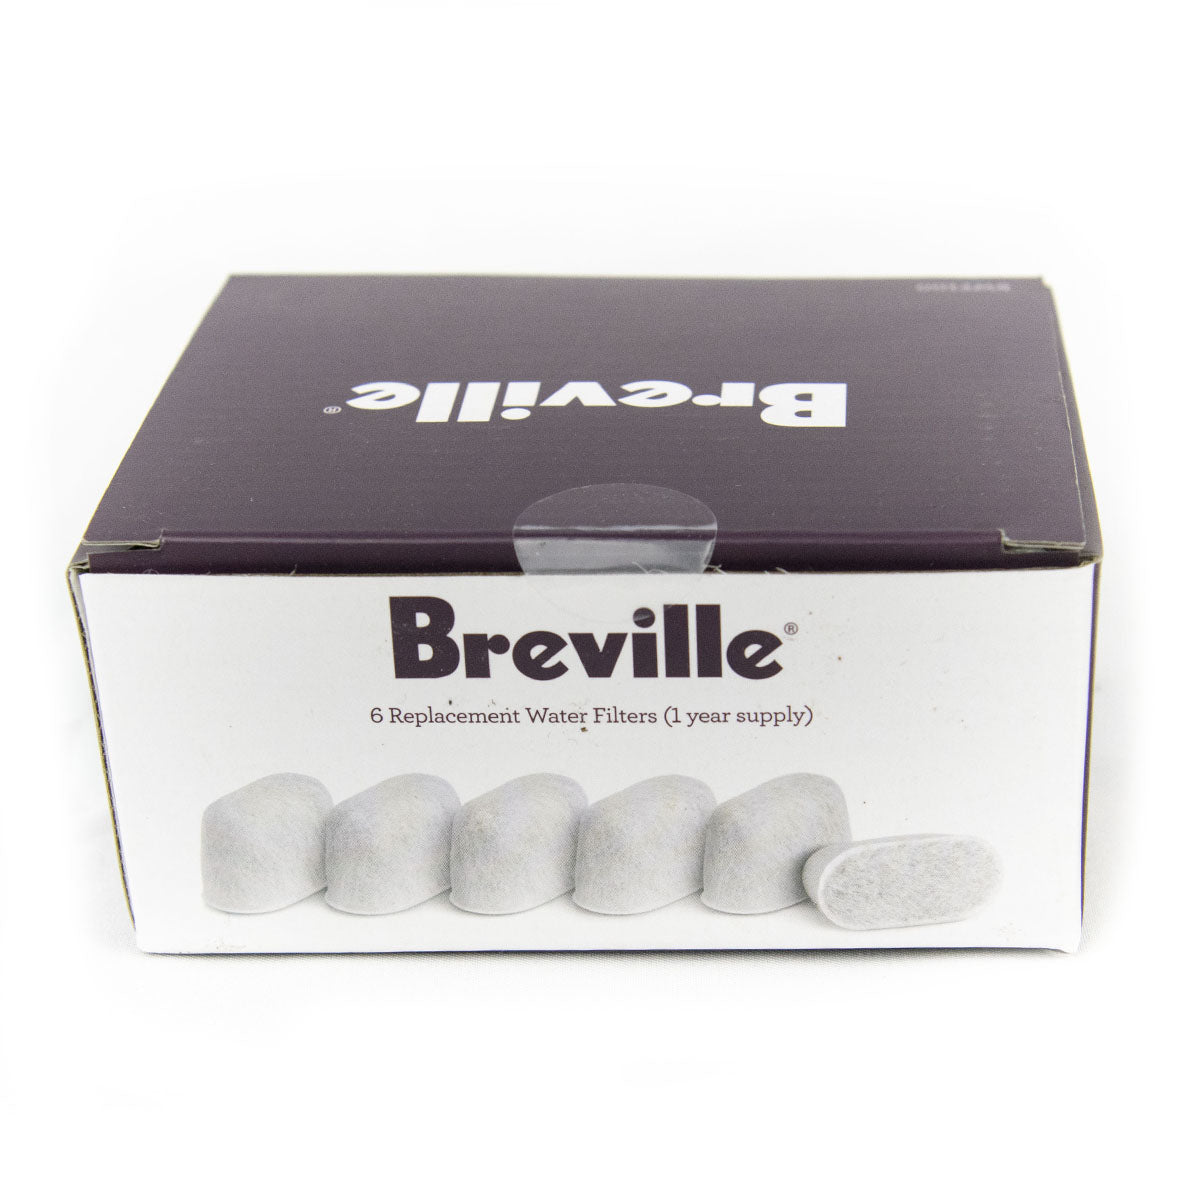 BREVILLE Replacement Water Filters